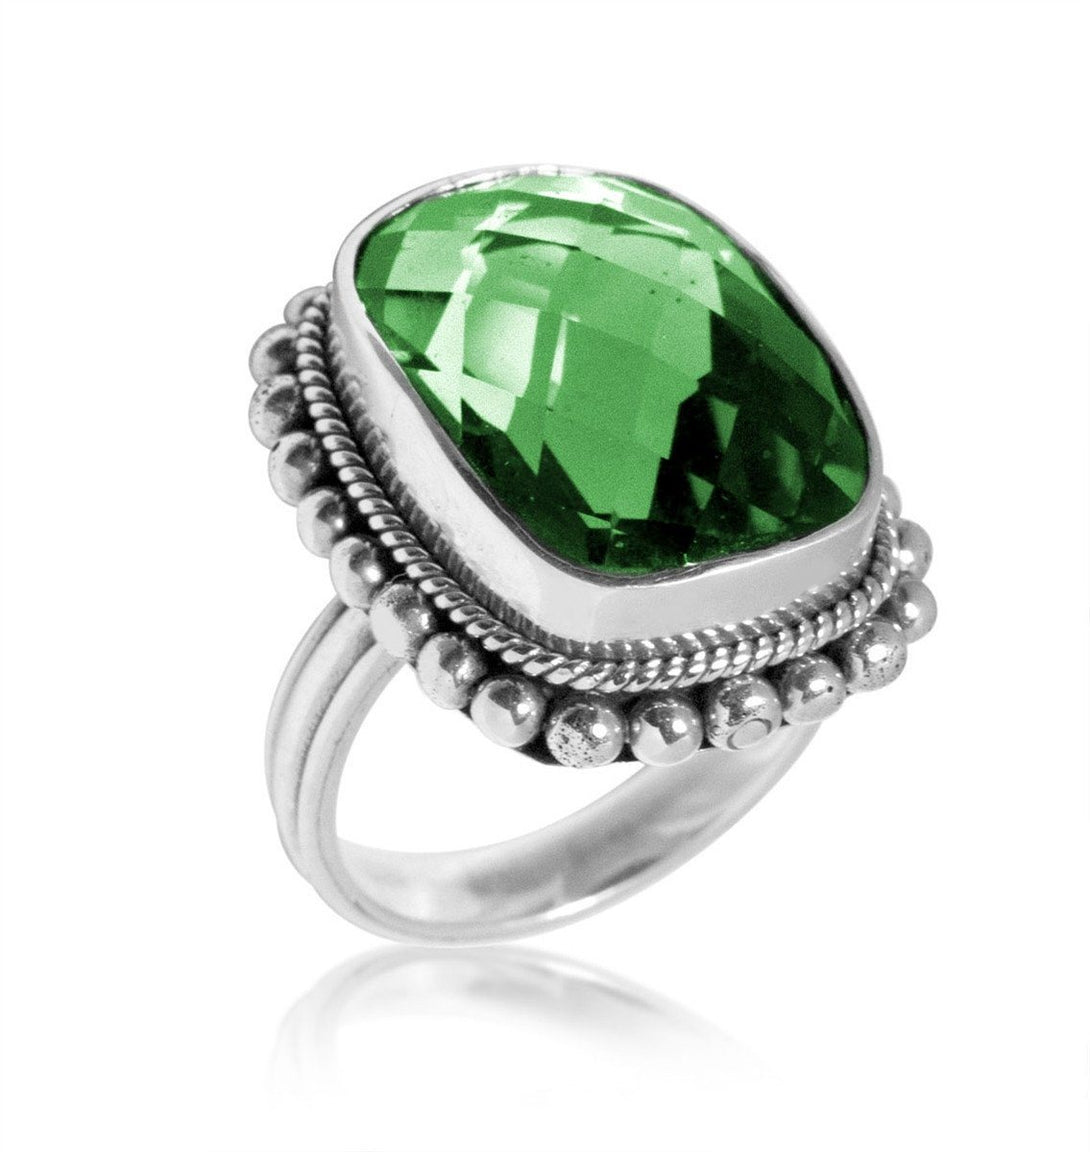 AR-6062-GQ-12" Sterling Silver Ring With Green Quartz Jewelry Bali Designs Inc 